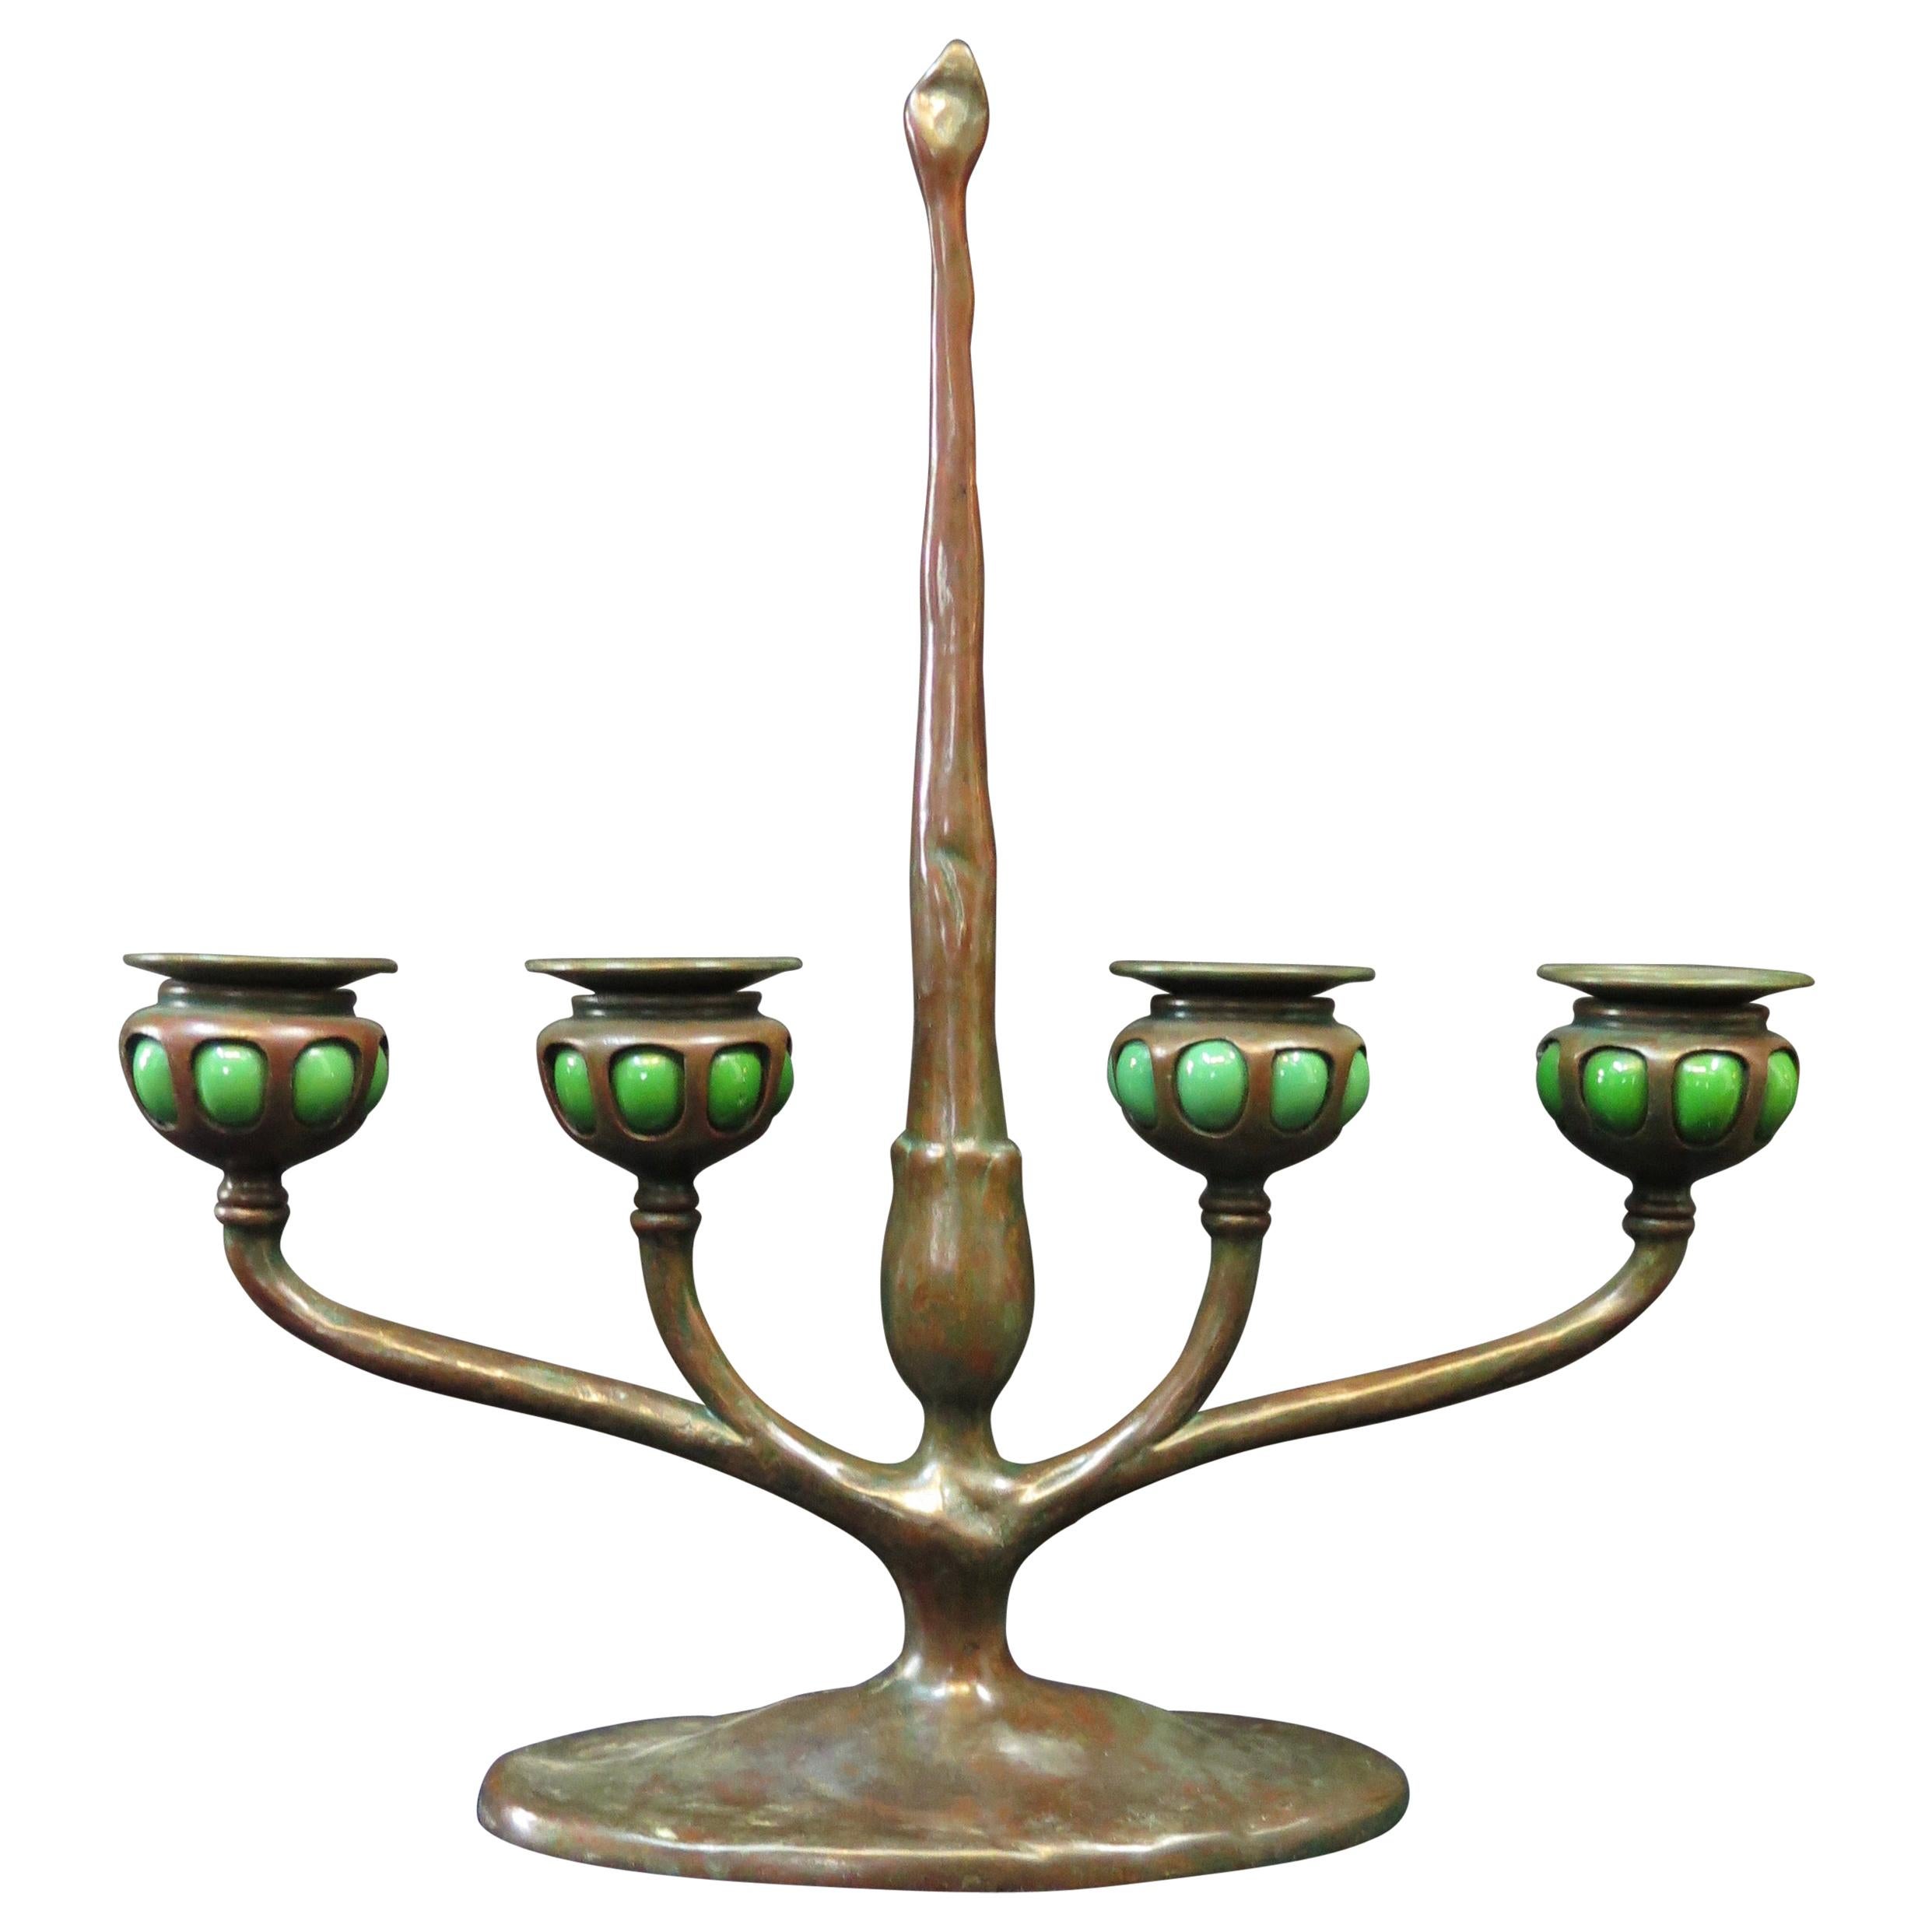 Tiffany Studios Four Place Candelabra with Blown Out Green Glass Candleholders